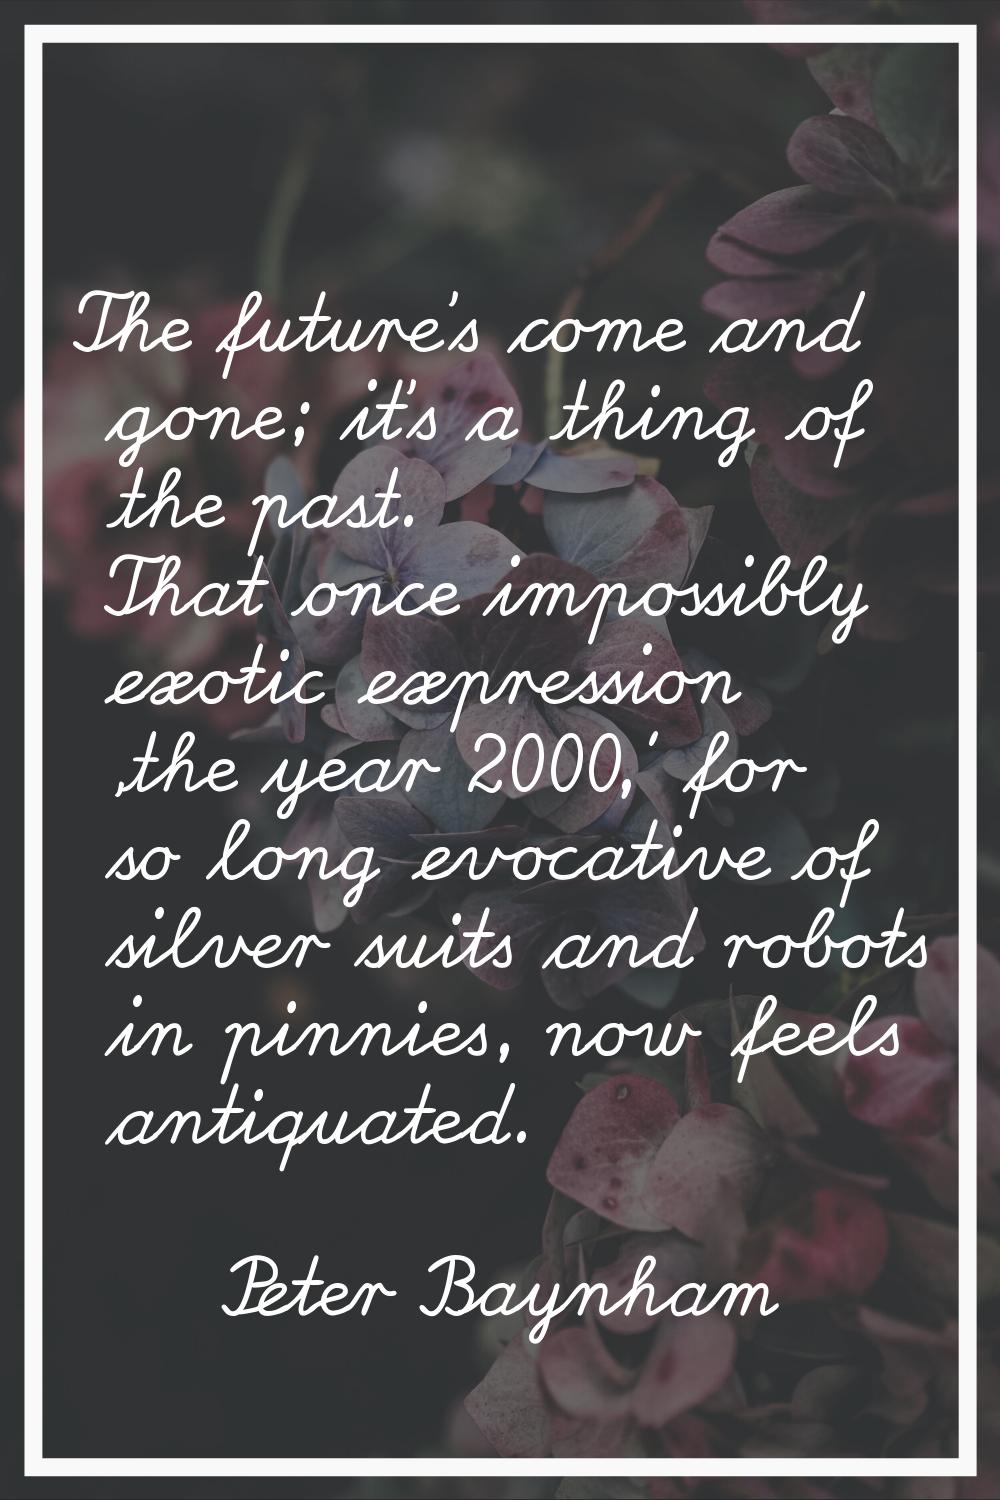 The future's come and gone; it's a thing of the past. That once impossibly exotic expression 'the y